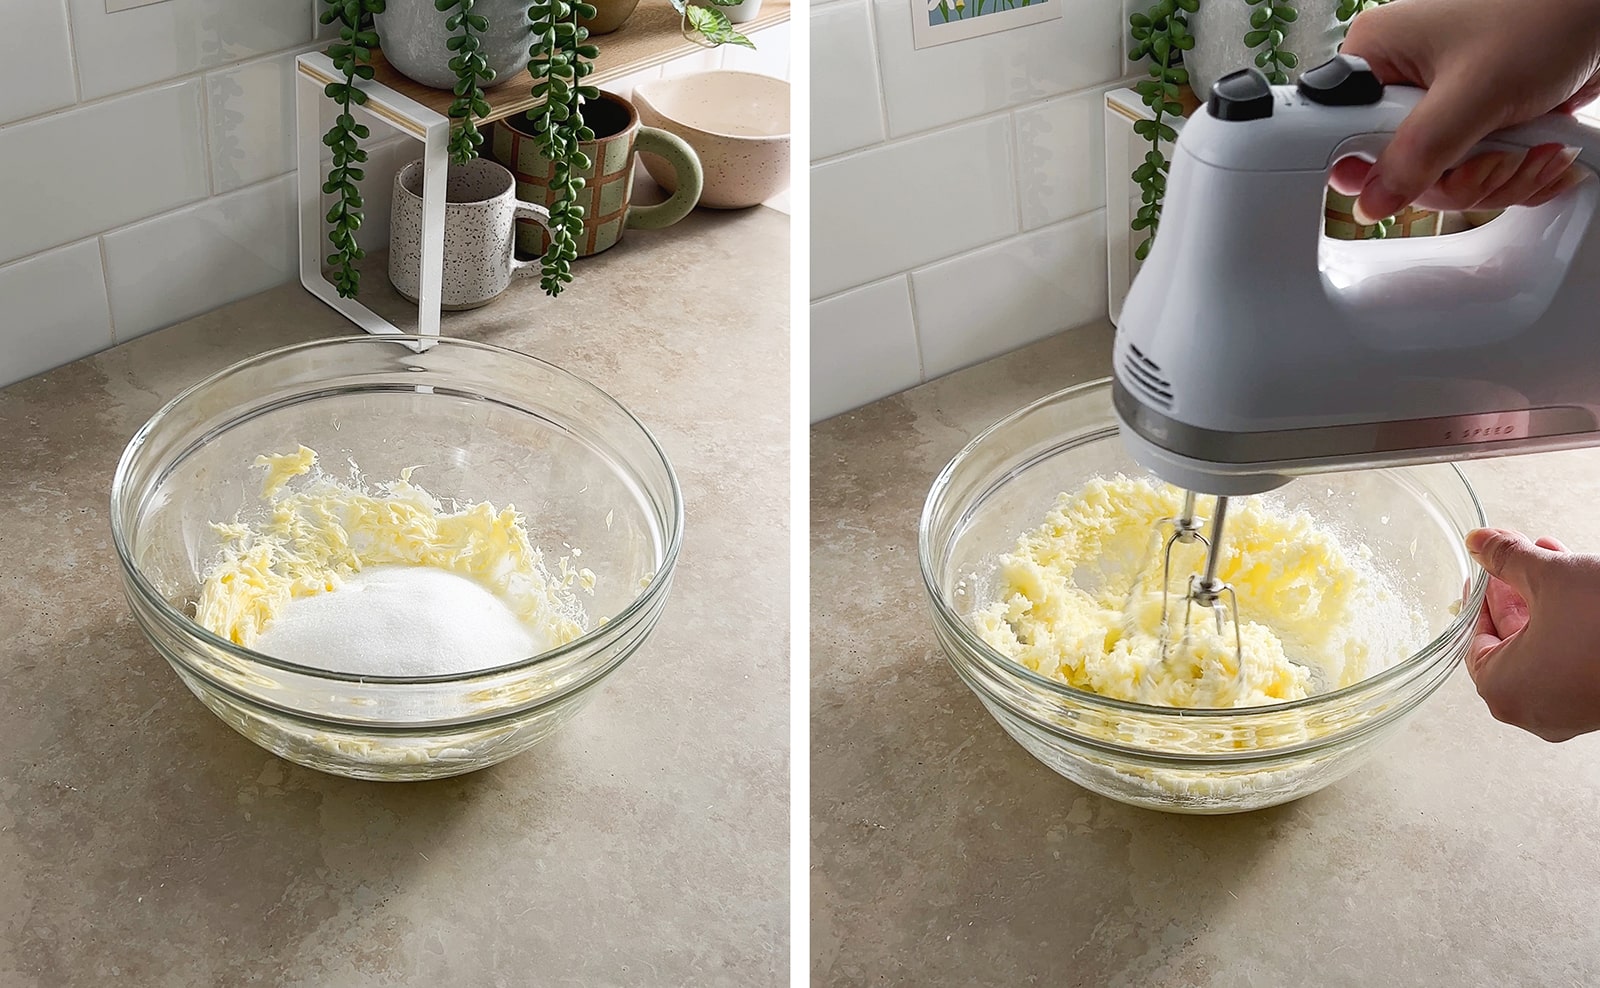 Left to right: butter and sugar in a mixing bowl, hand mixer creaming butter and sugar together in a bowl.